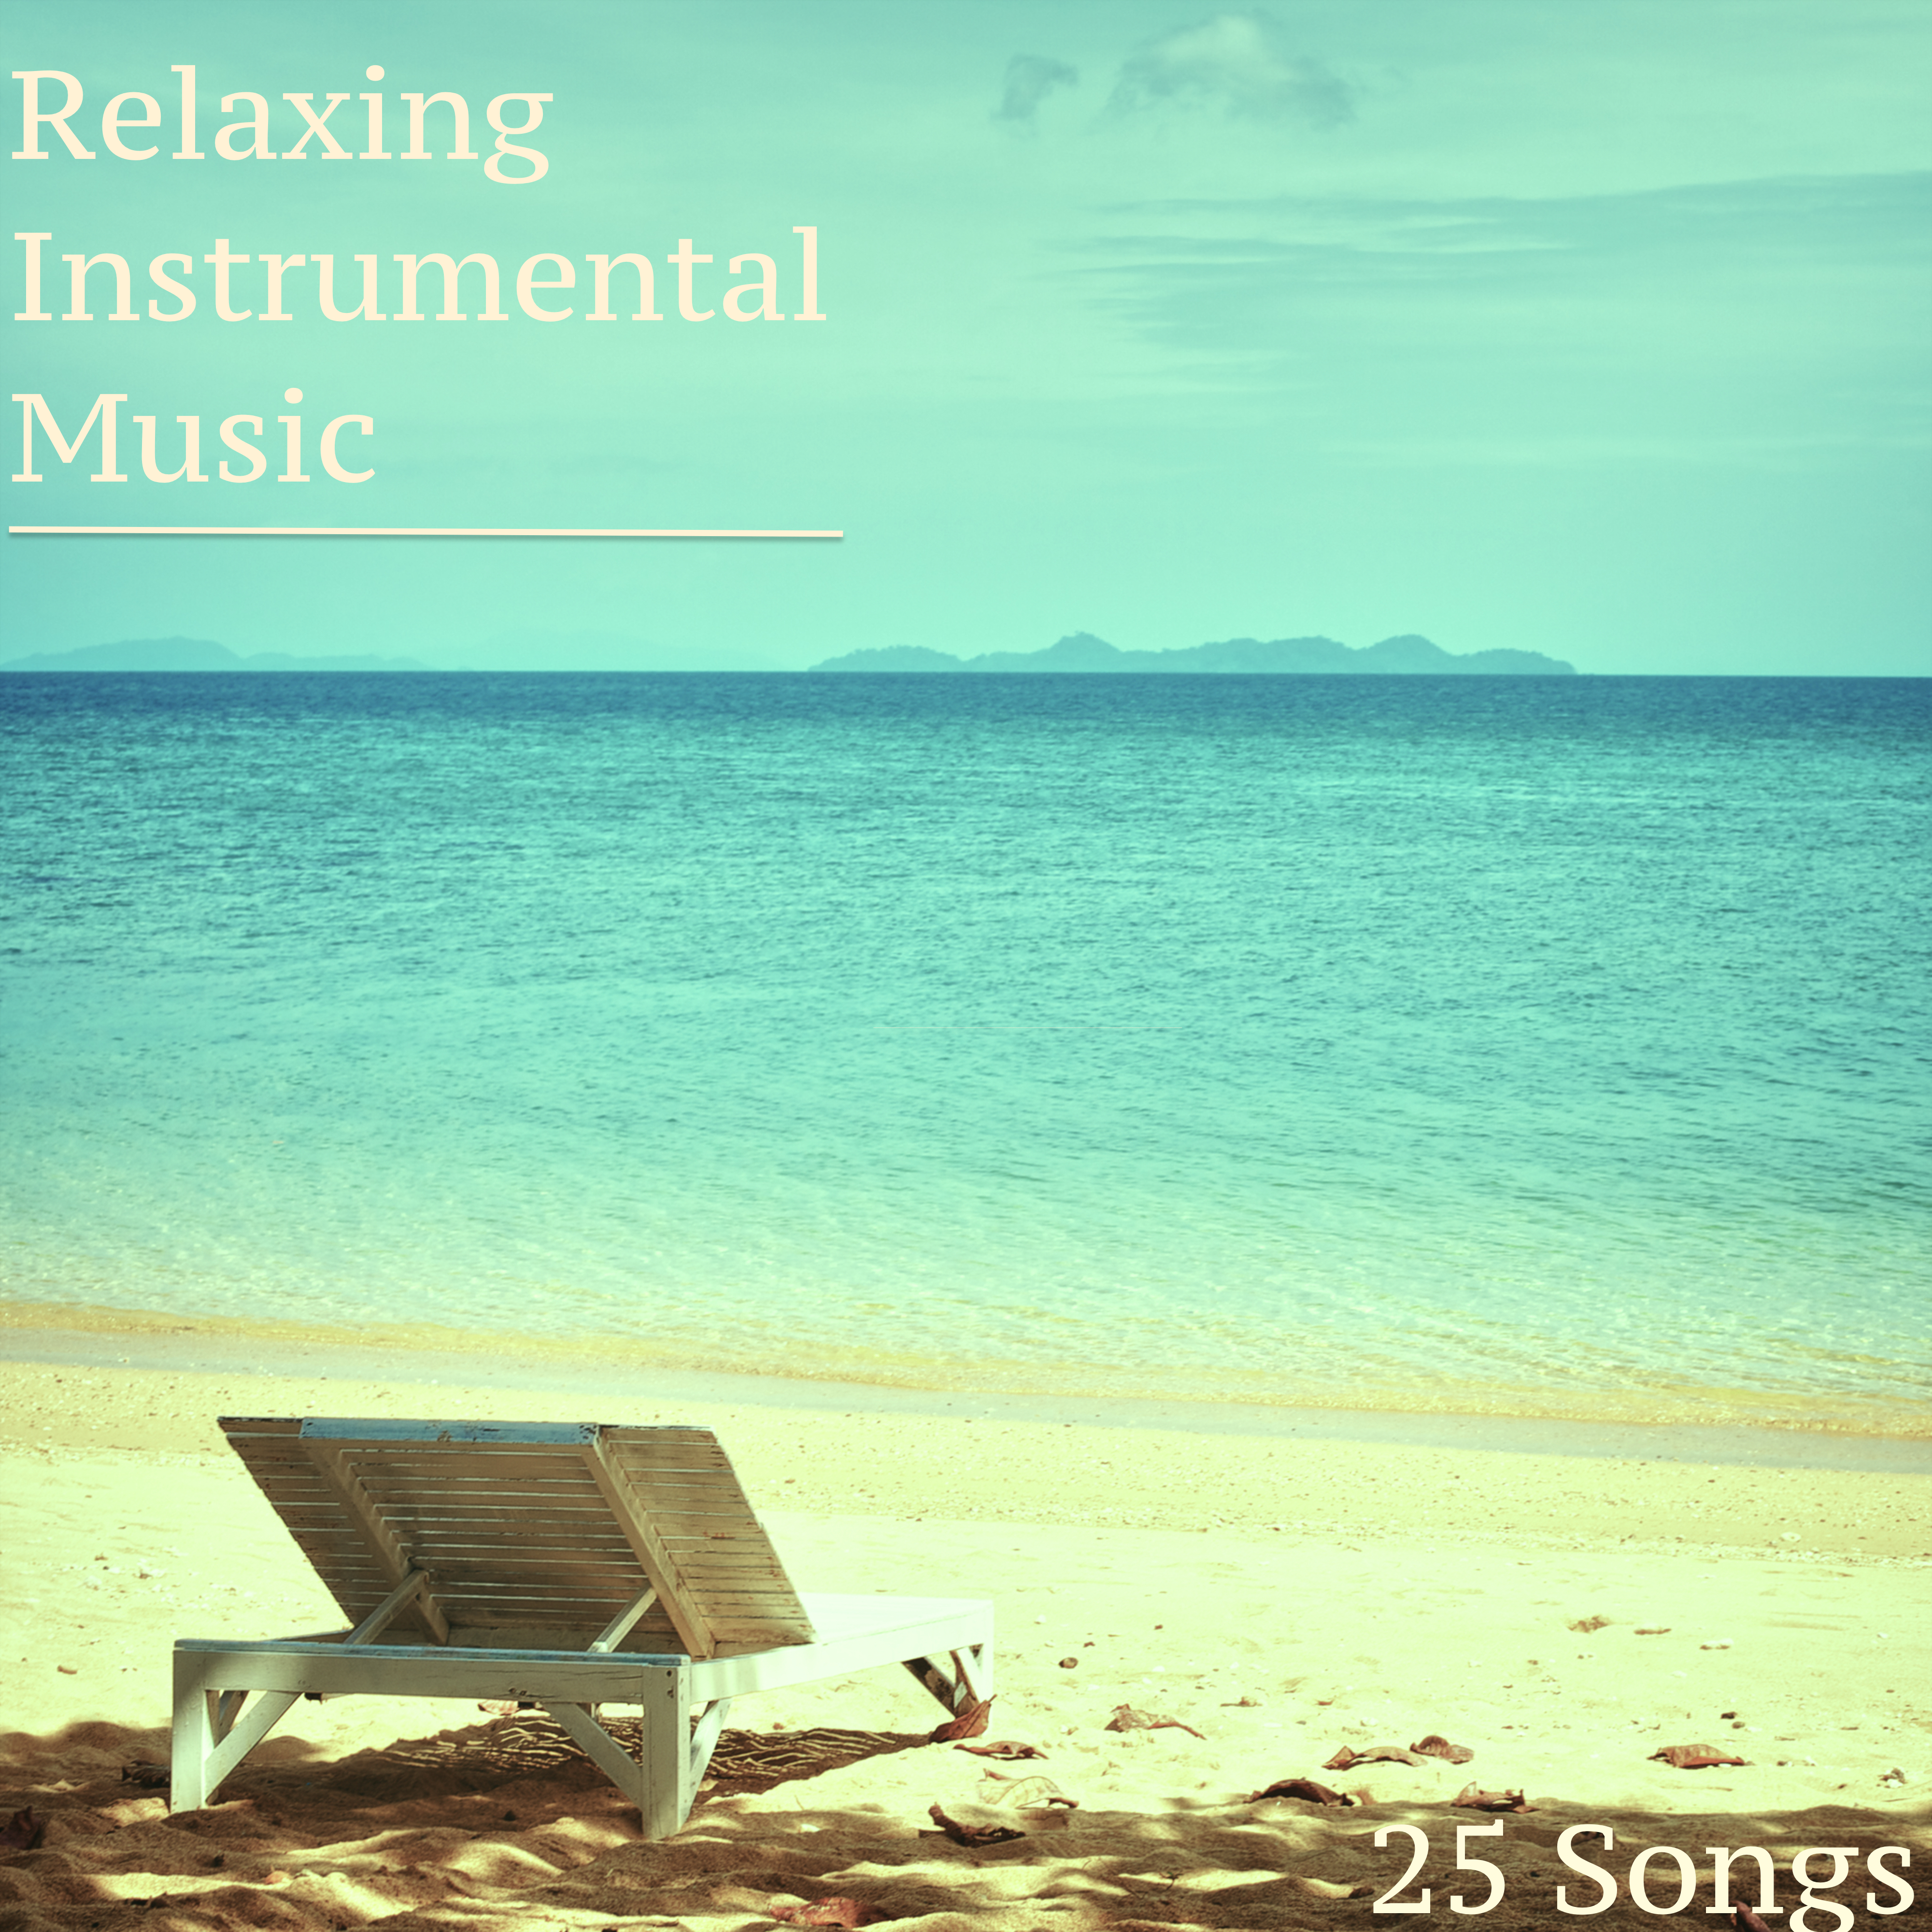 Relaxing Instrumental Music for Spa - Relaxation Spa Music for Serenity and Tranquility, Calming Music for Massage Therapy